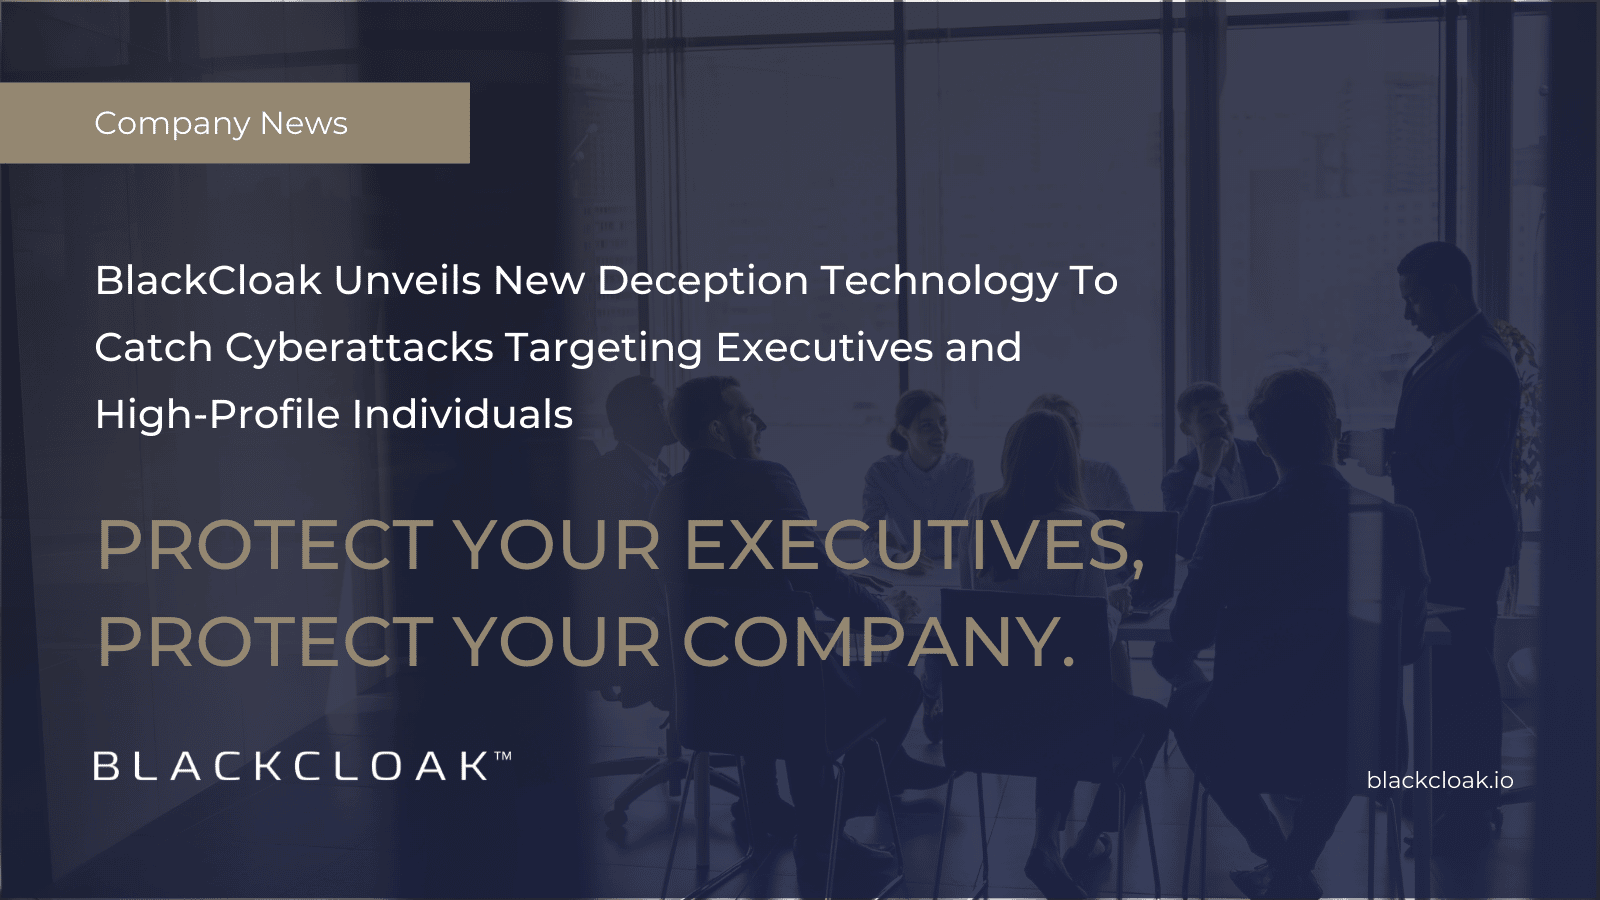 BlackCloak unveils new deception technology to catch cyberattacks targeting executives and high-profile individuals